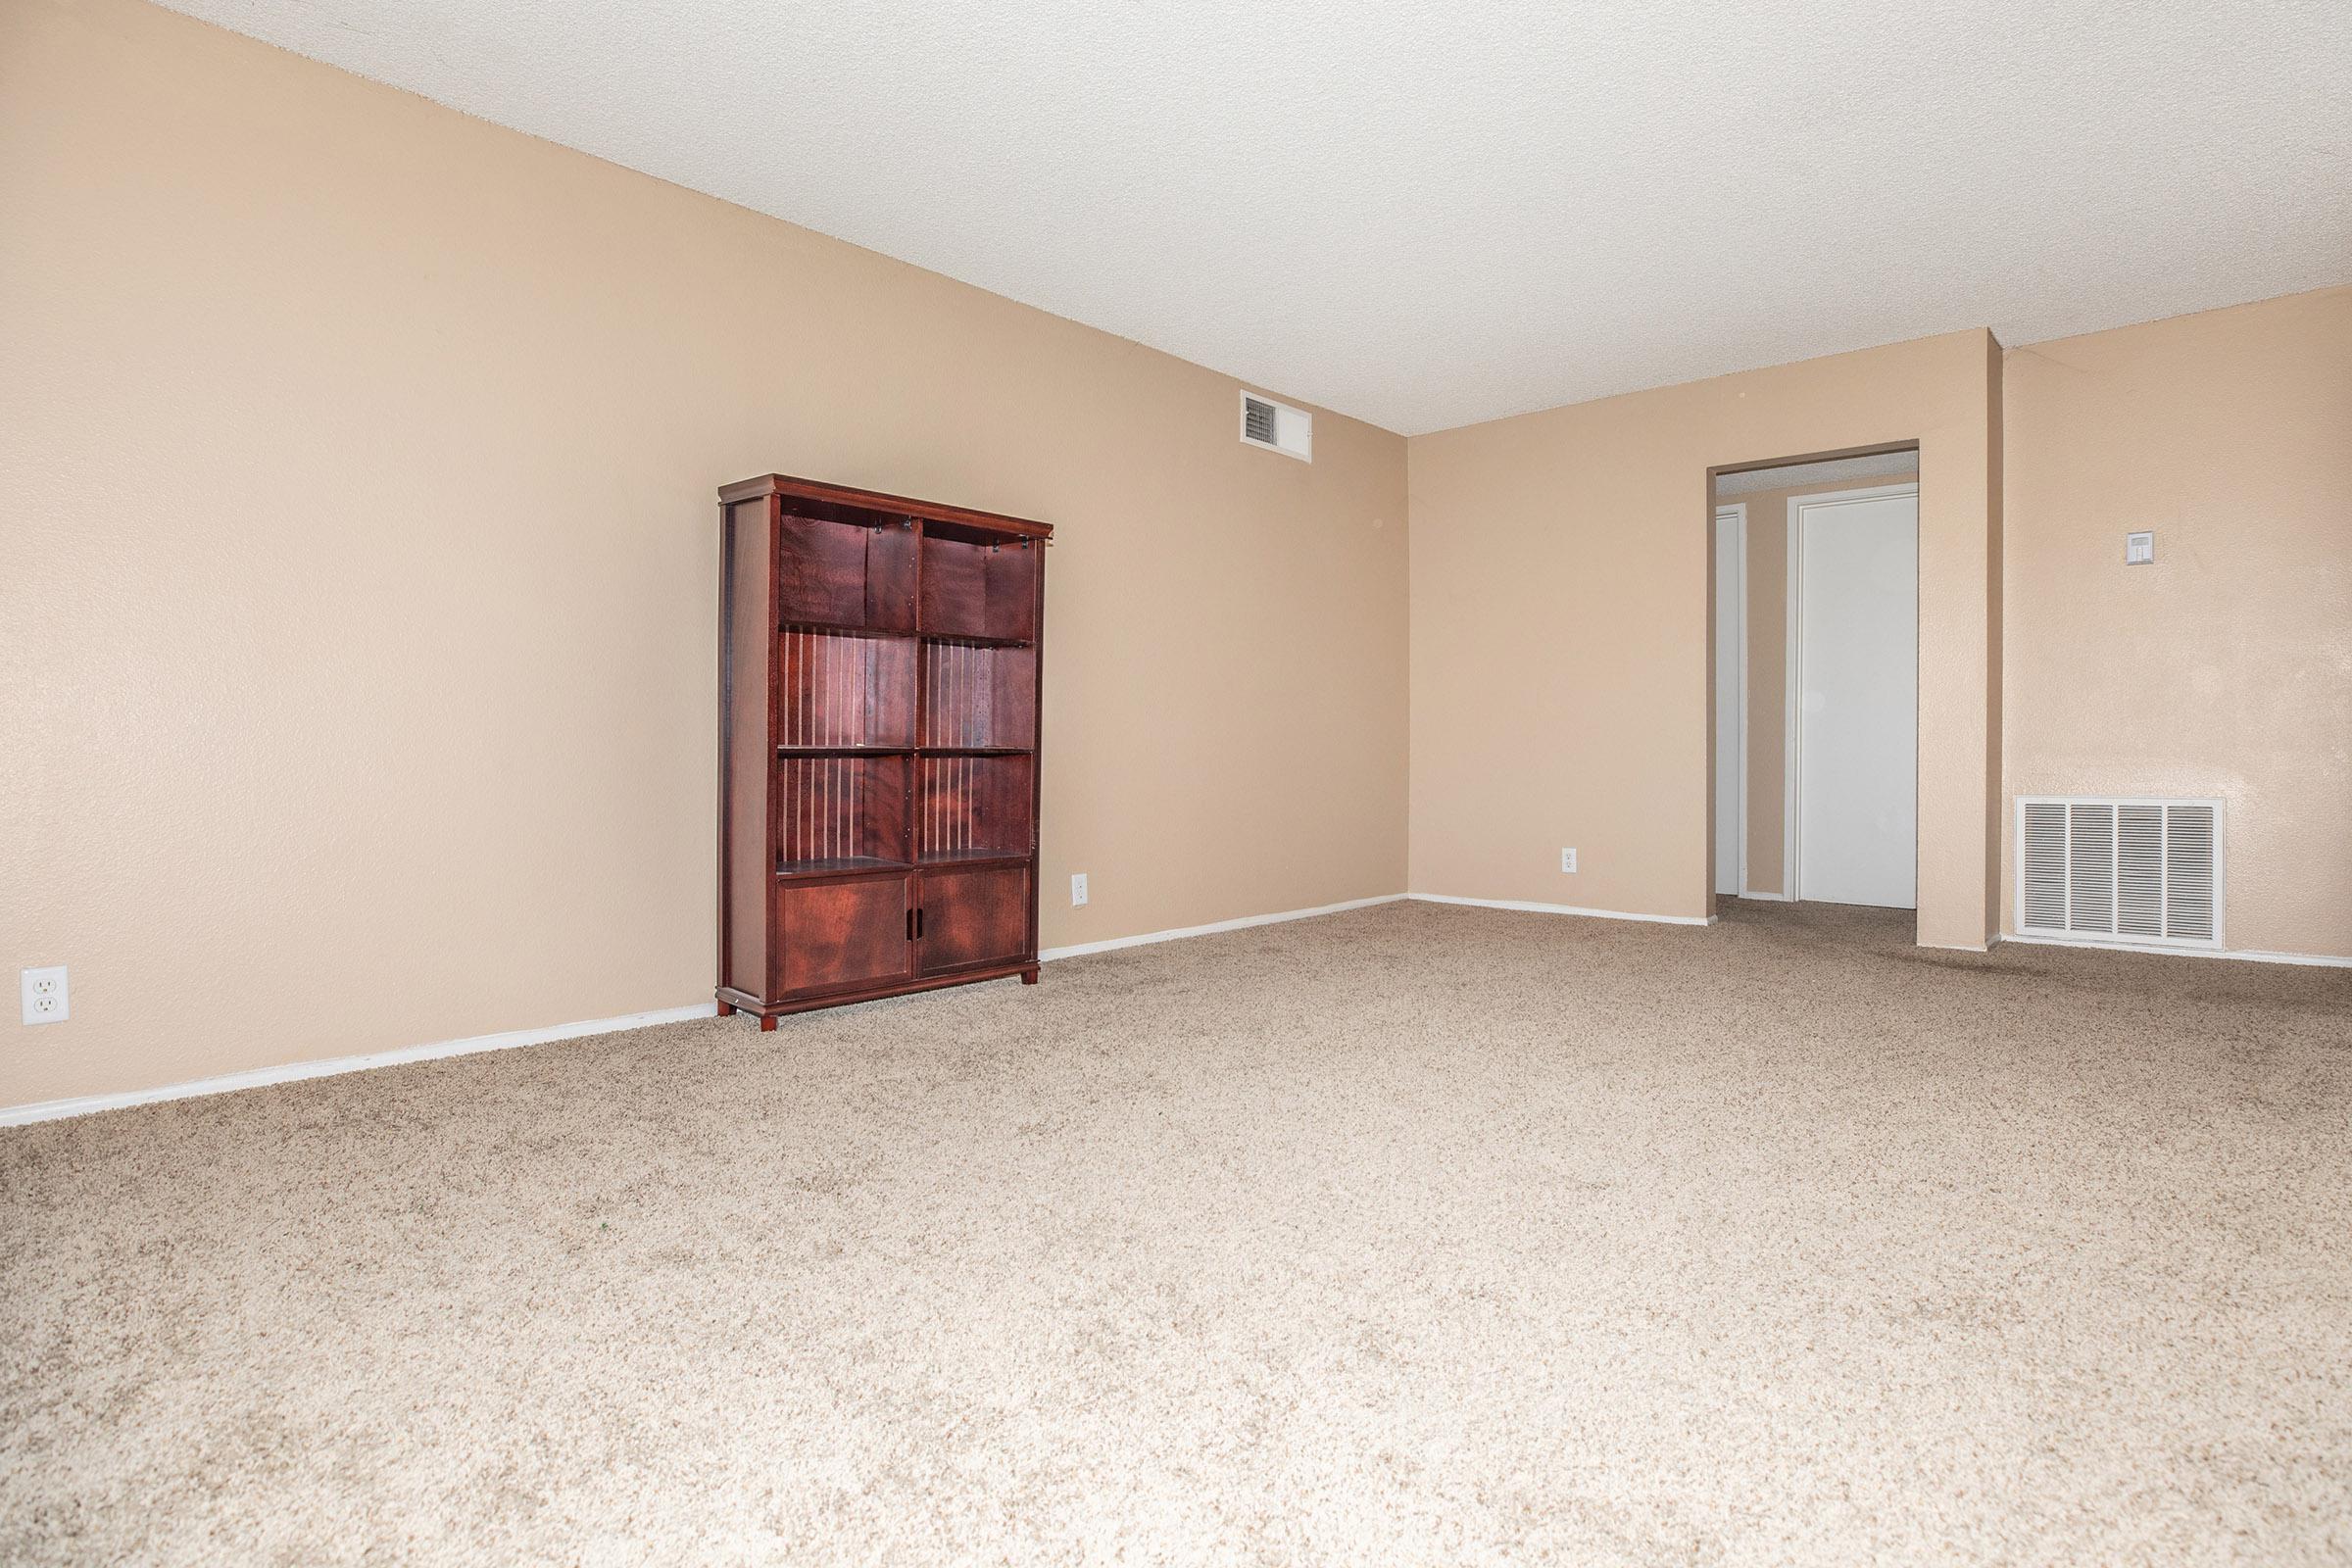 Unfurnished living room with carpets